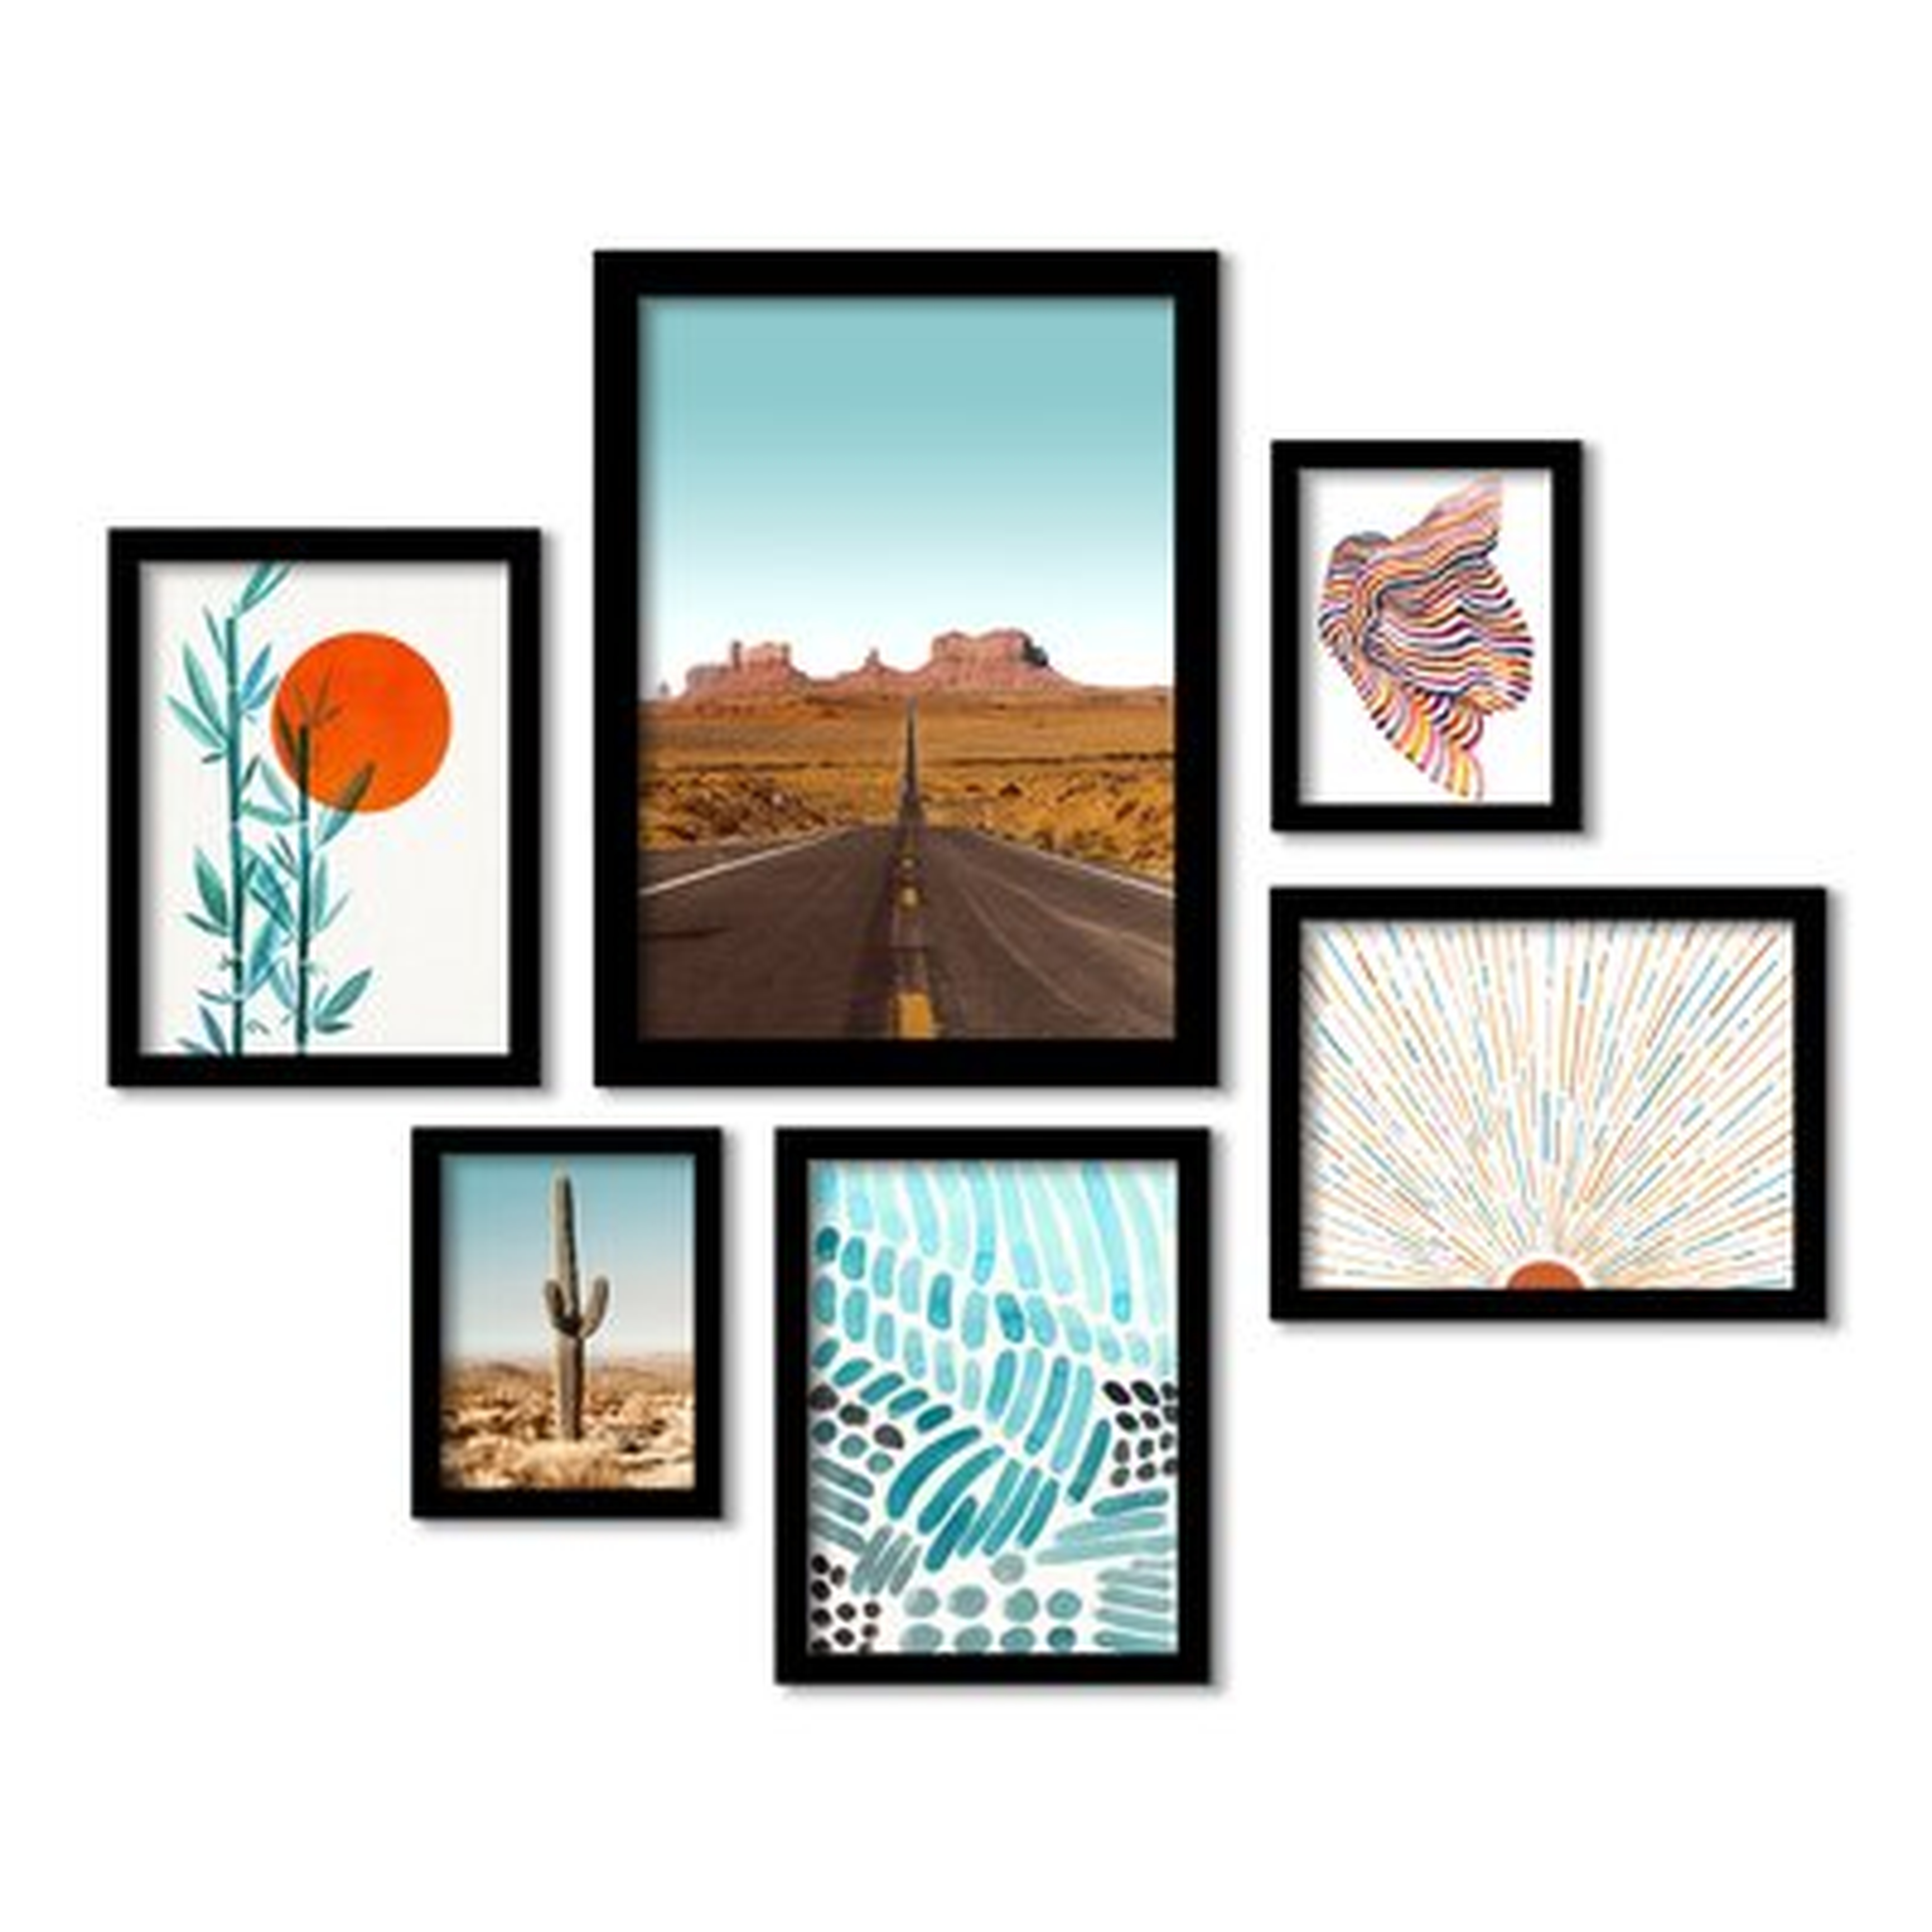 Grand Canyon by Tanya Shumkina - 6 Piece Picture Frame Print Set on Paper - Wayfair